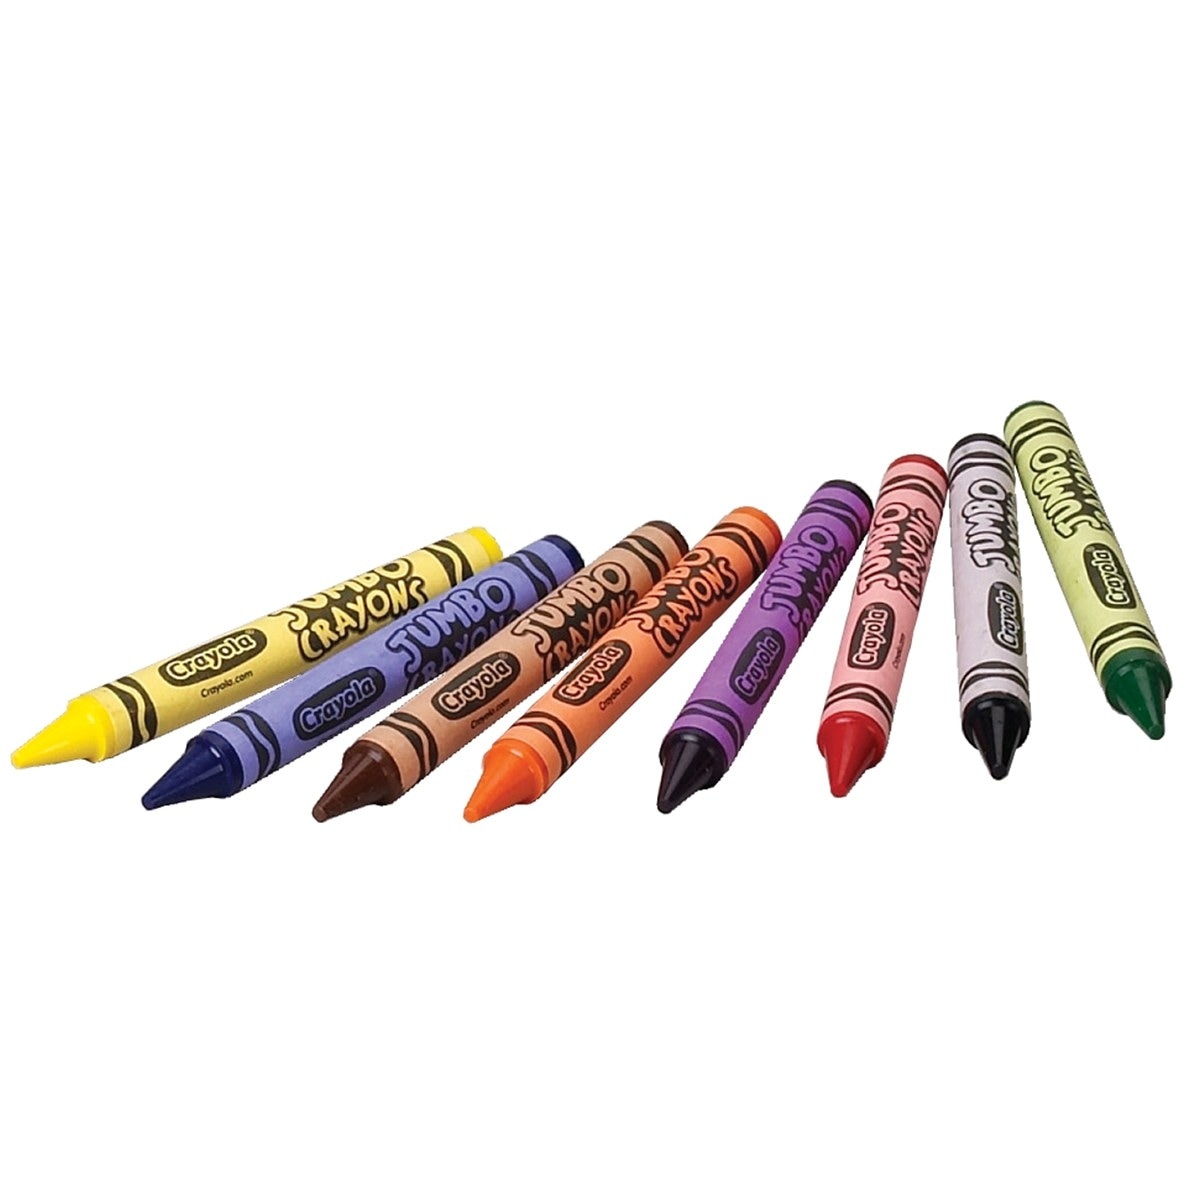 Crayola. 528389 Jumbo Classpack Crayons 25 Each of 8 Colors 200/Box for  sale online